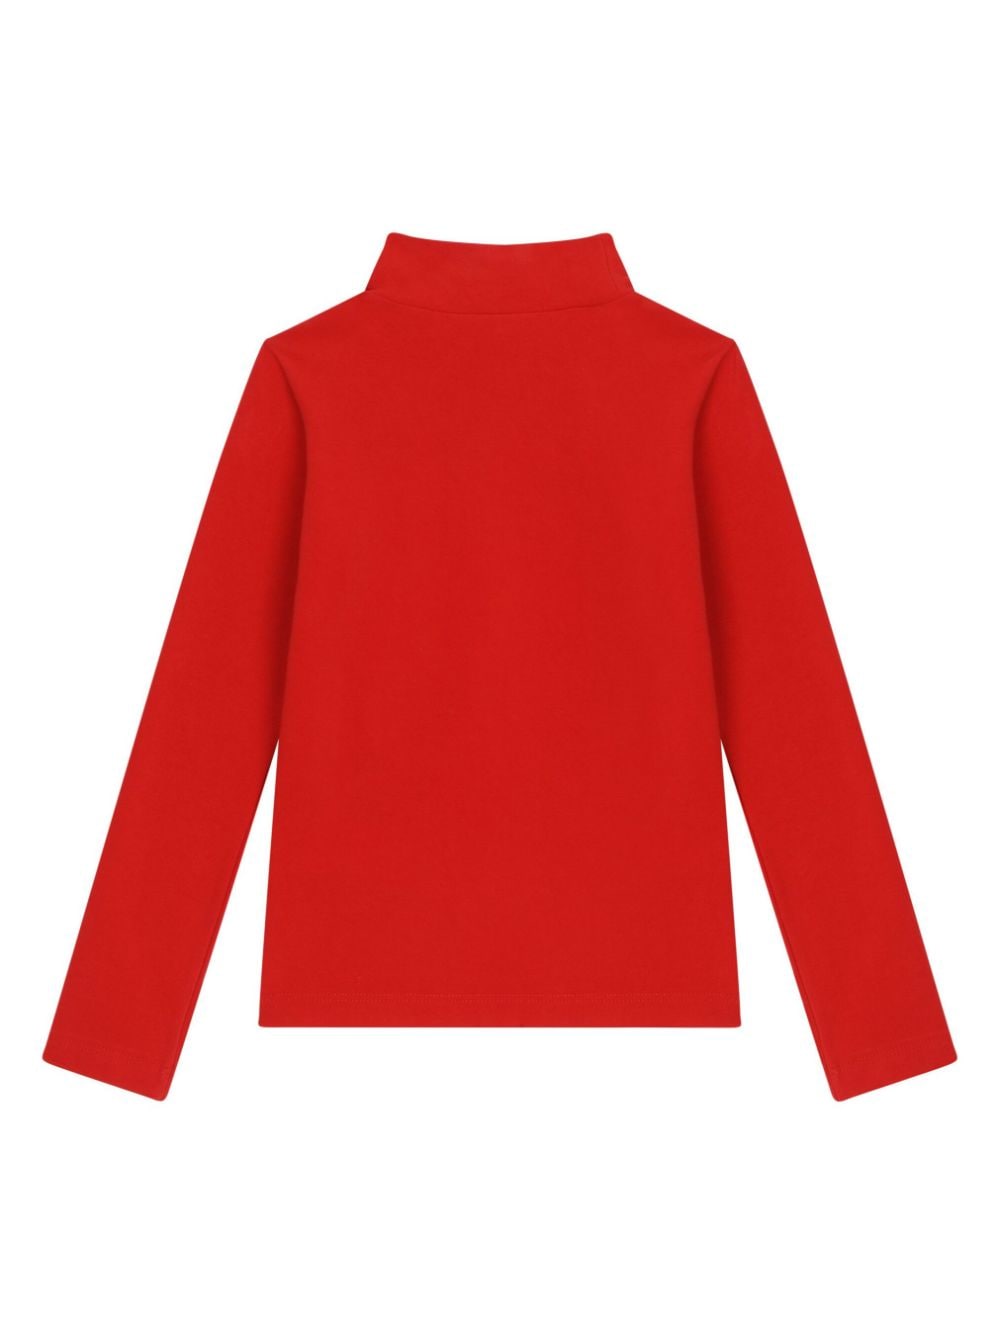 Red sweater for girls